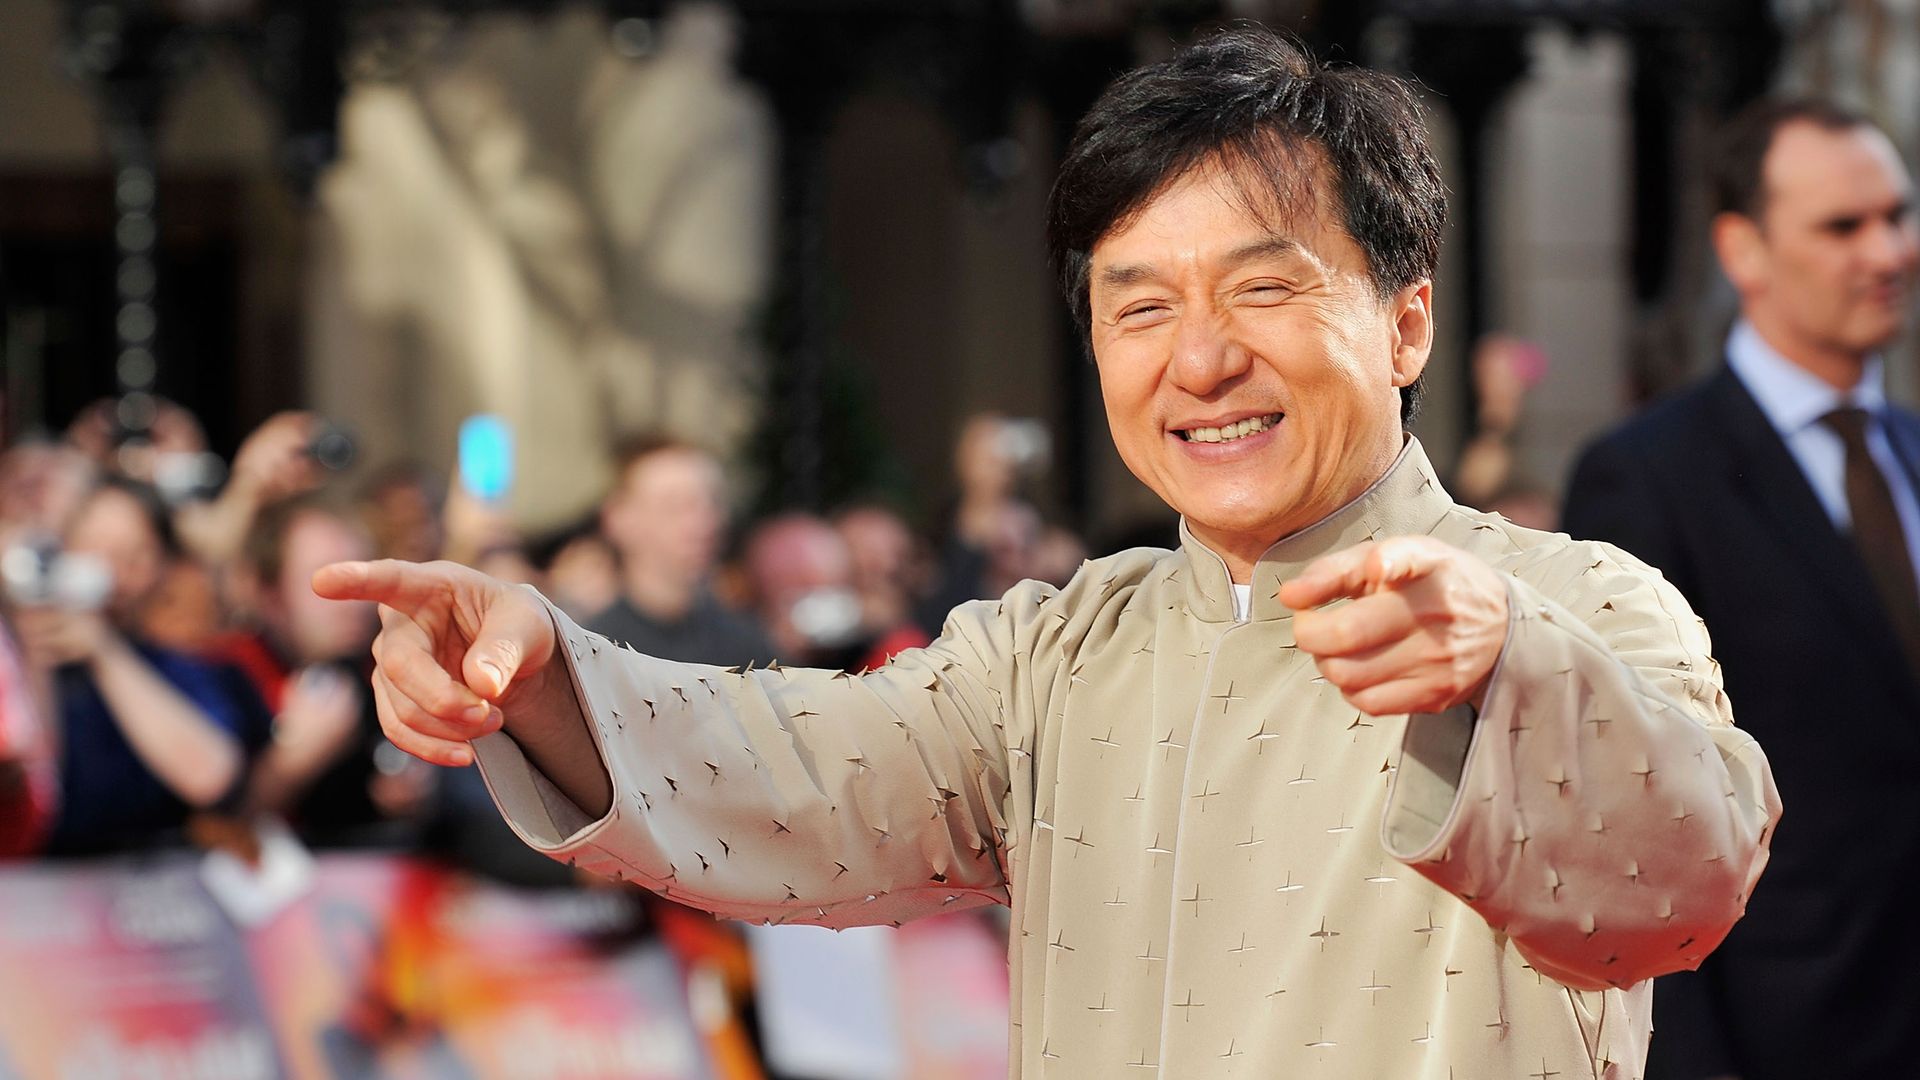 Jackie Chan attends the UK Film Premiere of The Karate Kid at Odeon Leicester Square on July 15, 2010